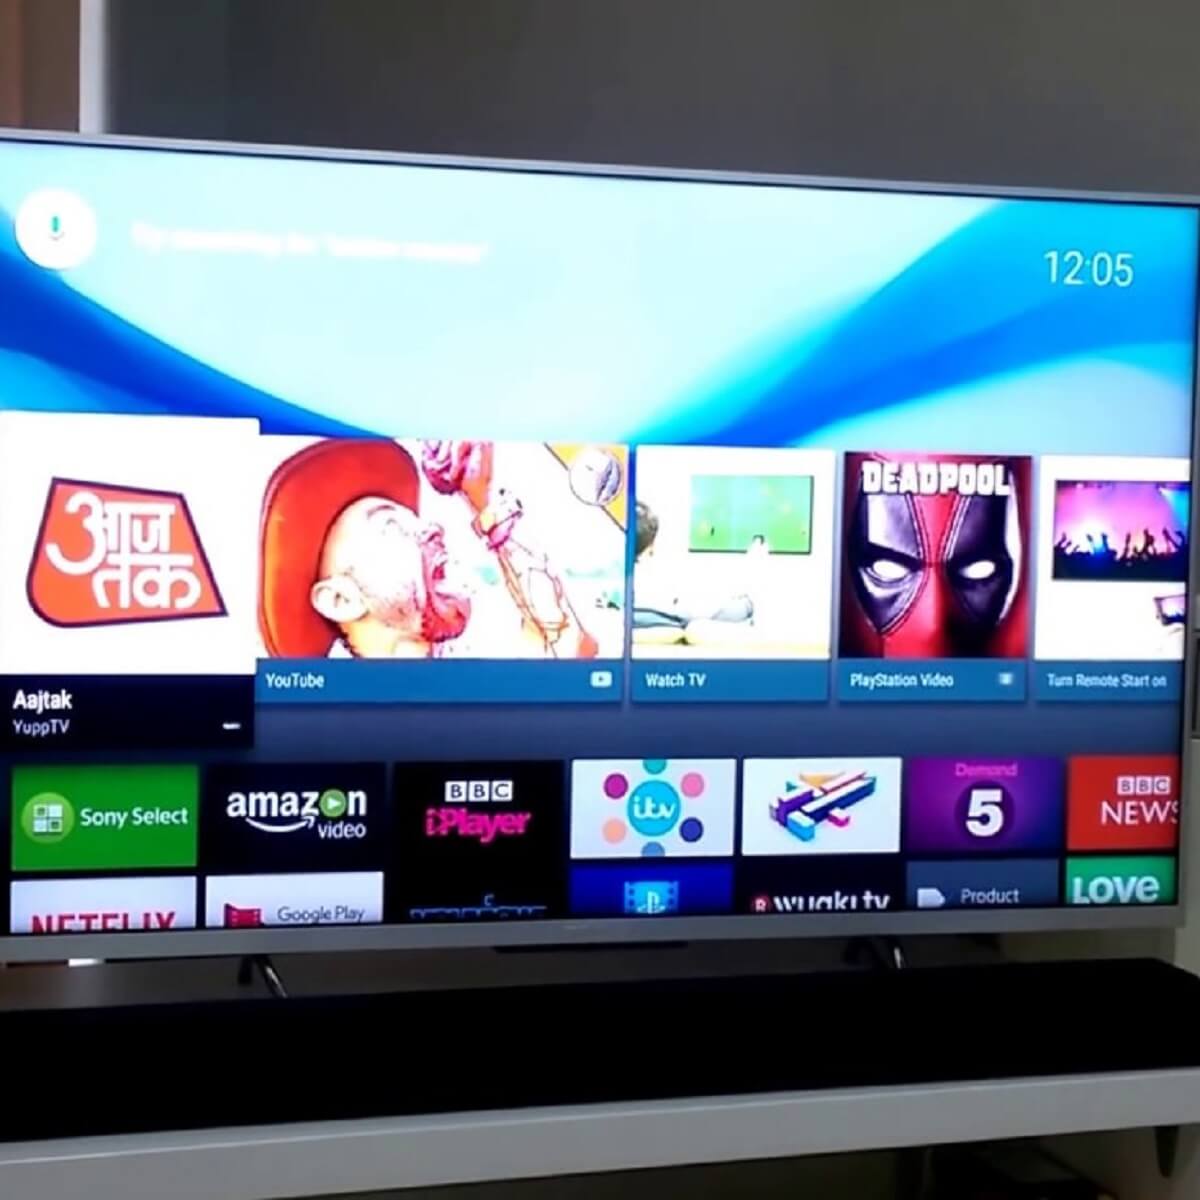 Your Sony Smart TV apps have disappeared? Get them back now